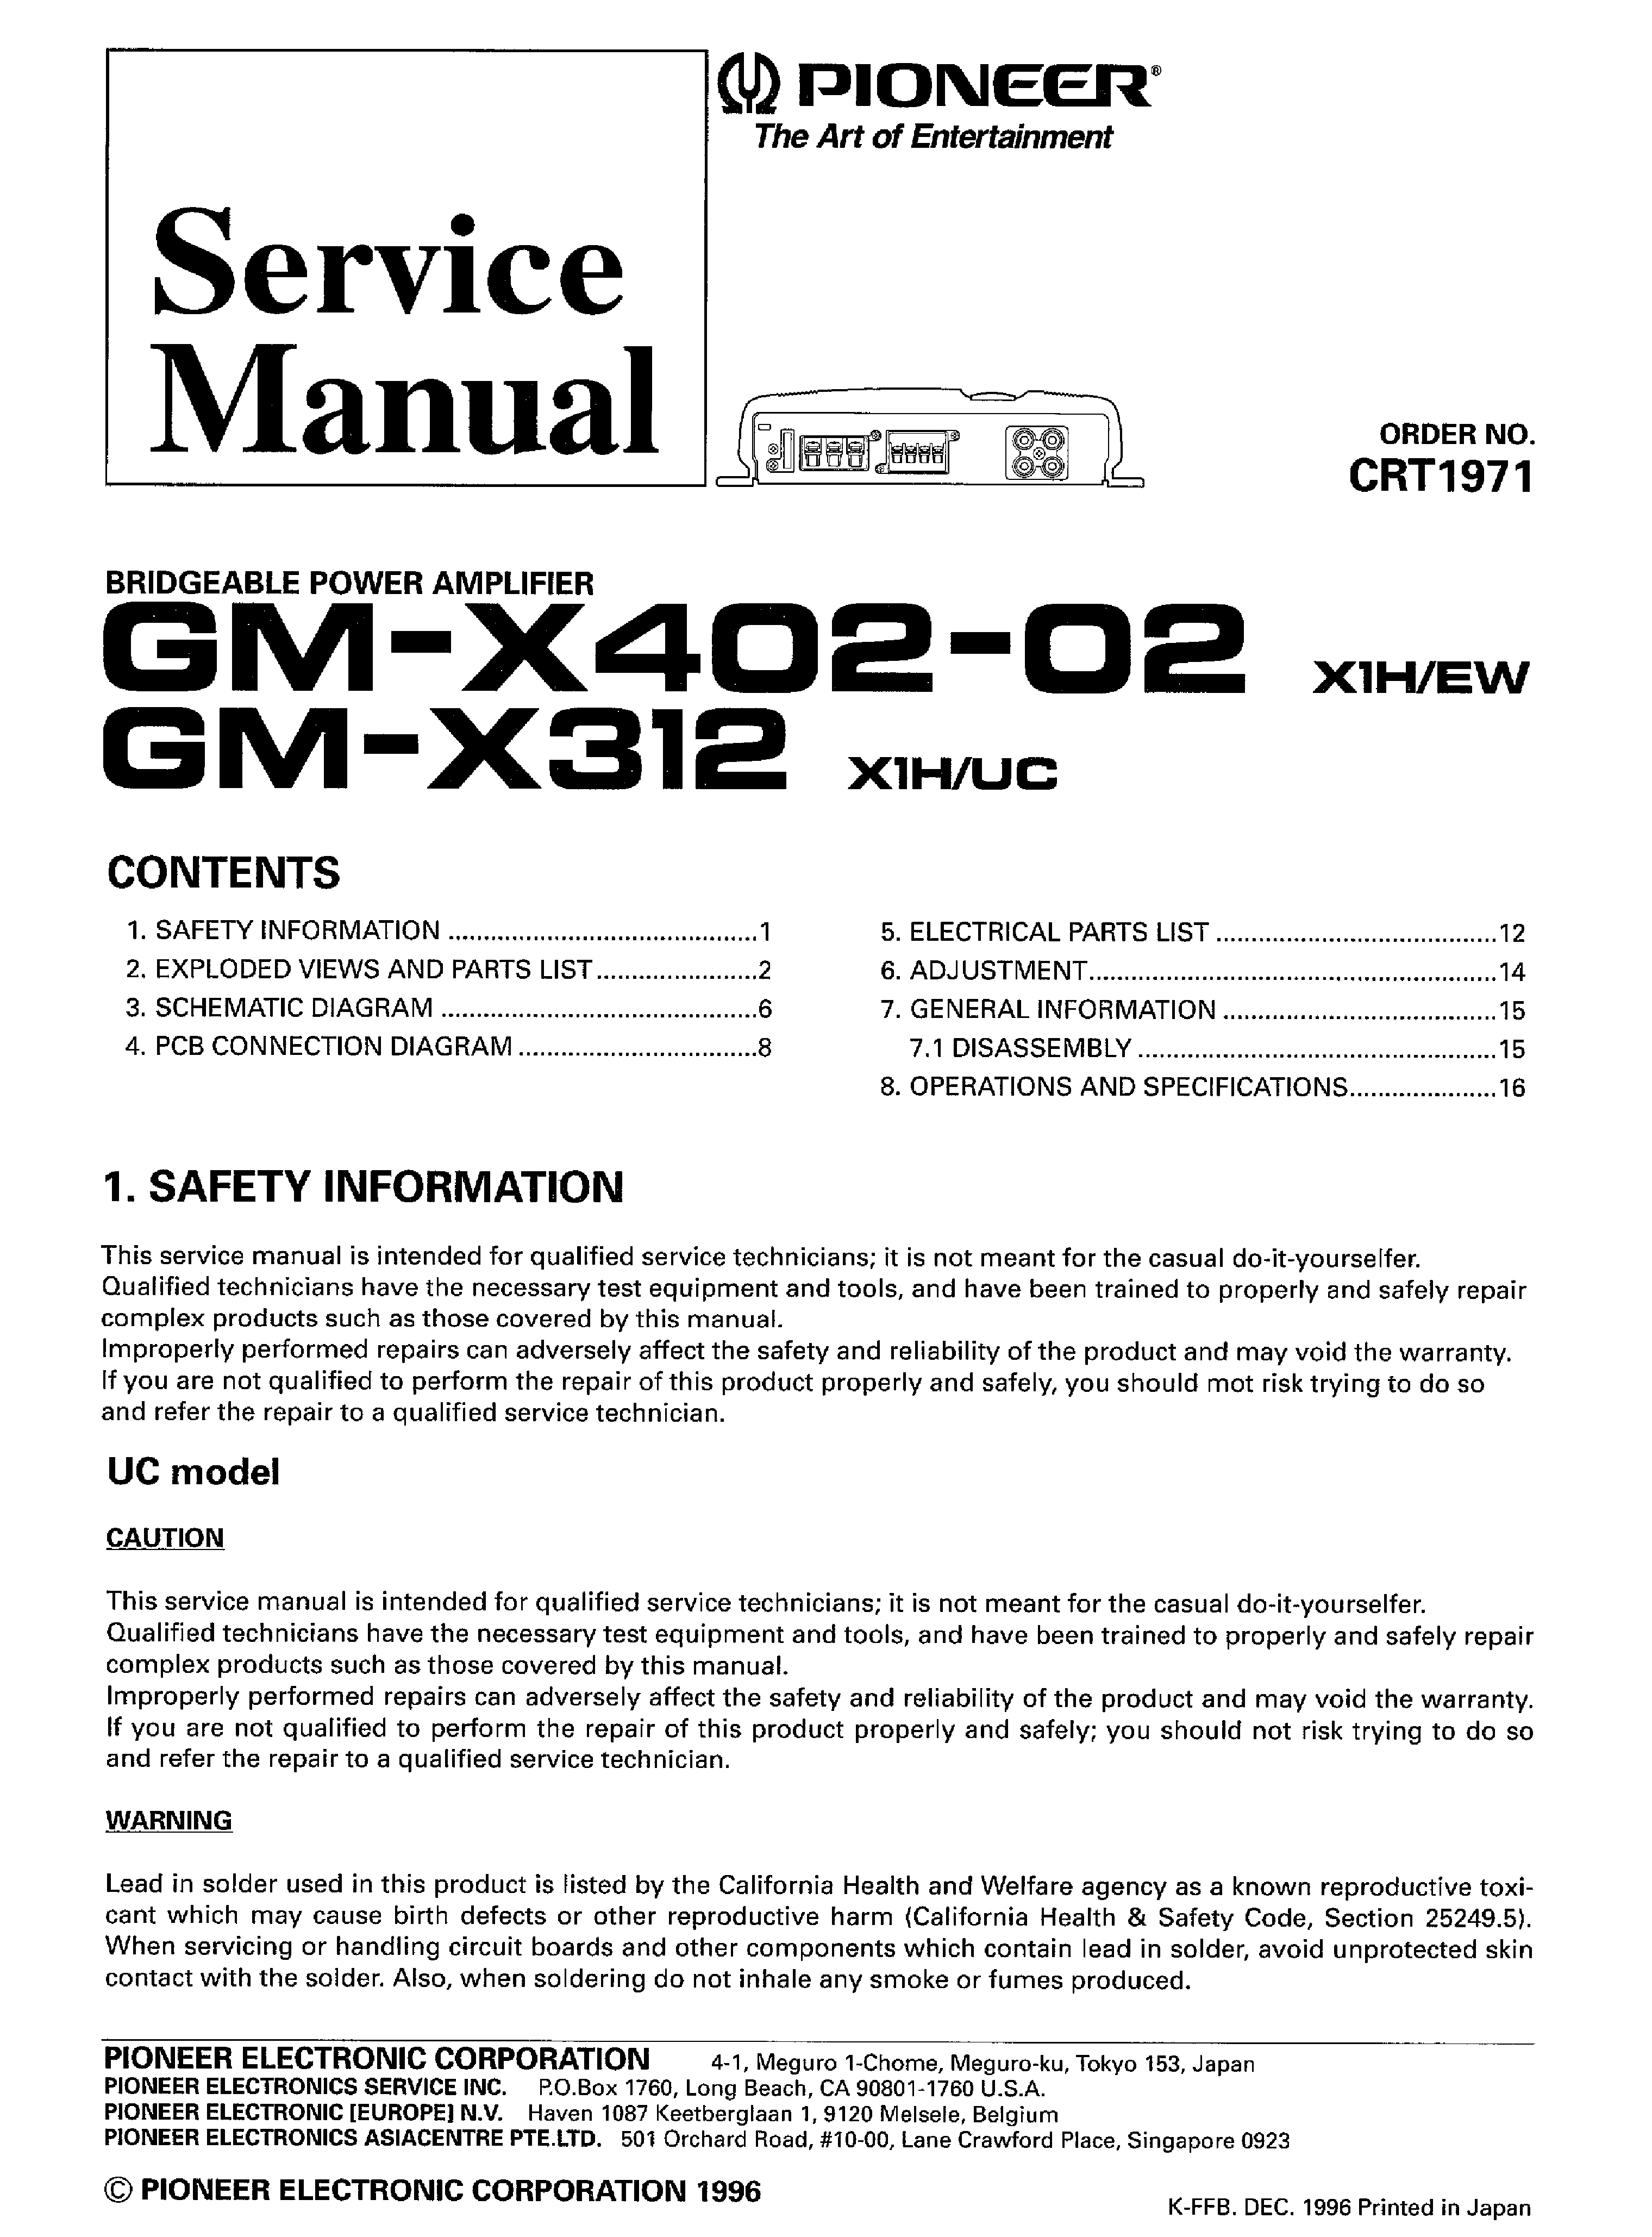 PIONEER GM-X312 402 service manual (1st page)